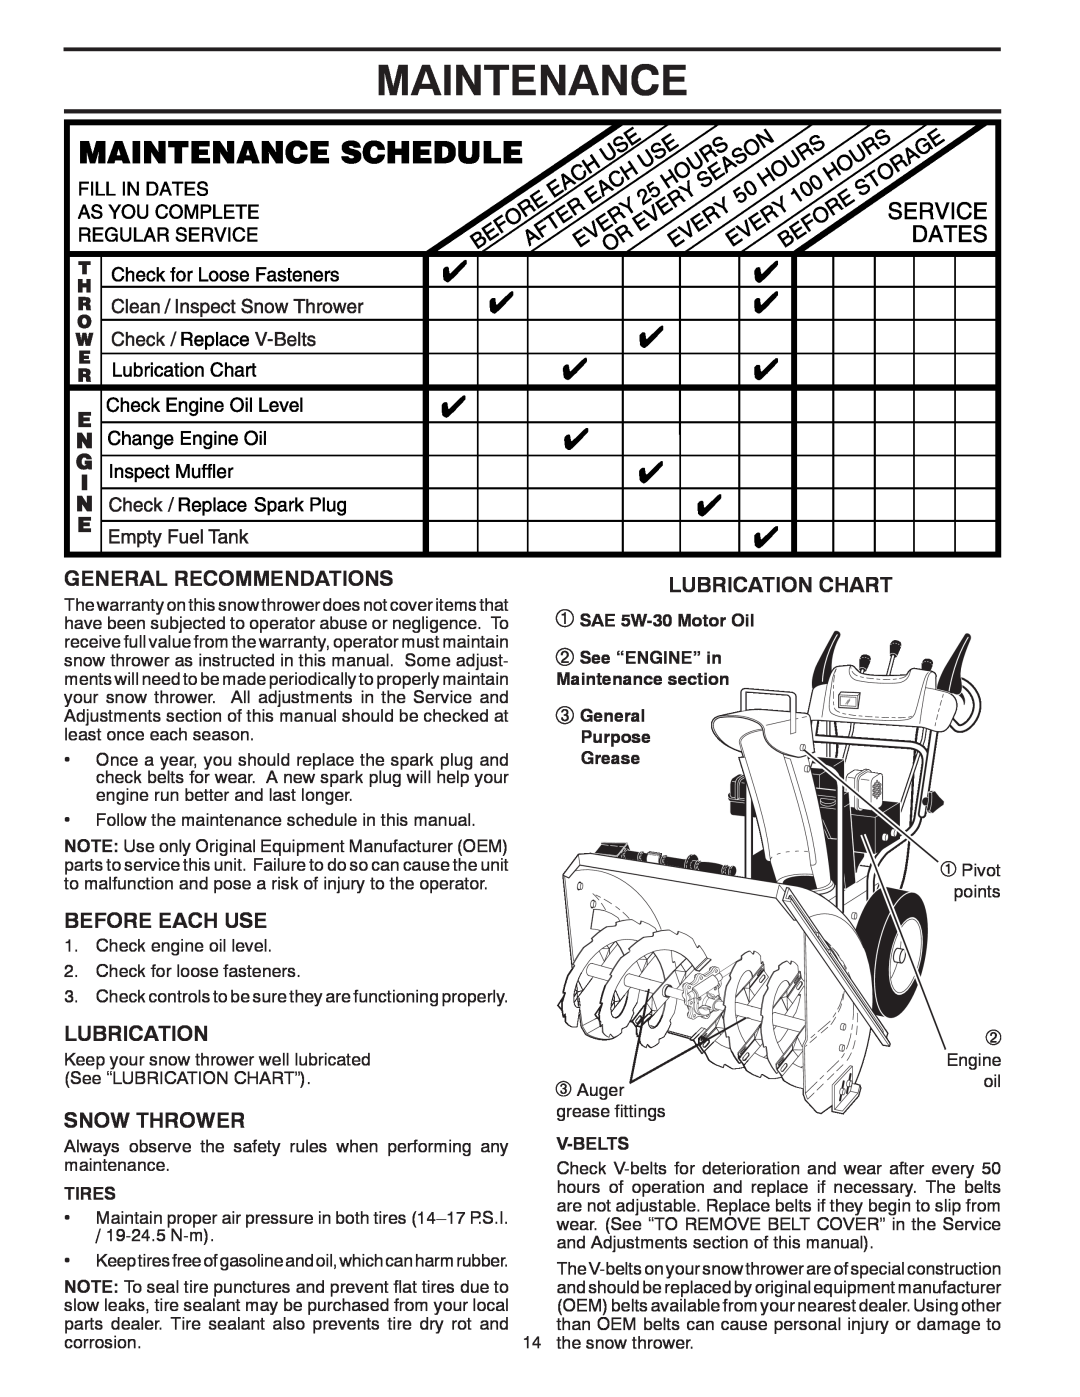 Poulan 96192001902 Maintenance, General Recommendations, Before Each Use, Snow Thrower, Lubrication Chart, Tires 